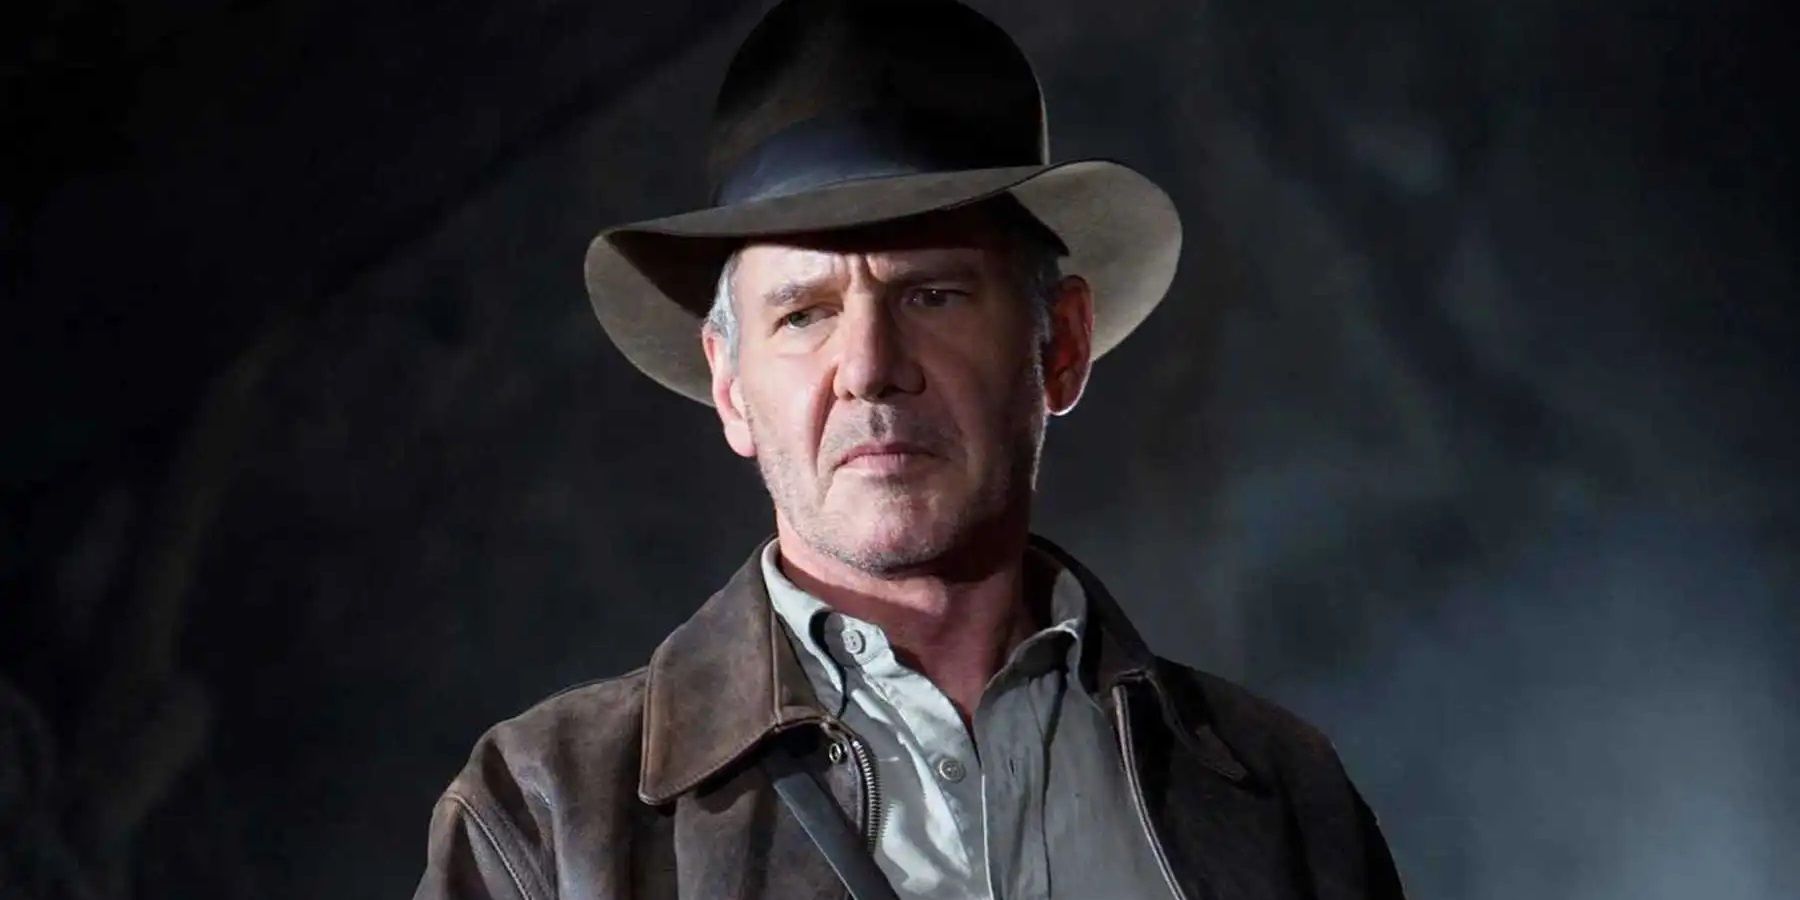 Harrison Ford as Indiana Jones in Kingdom of the Crystal Skull.